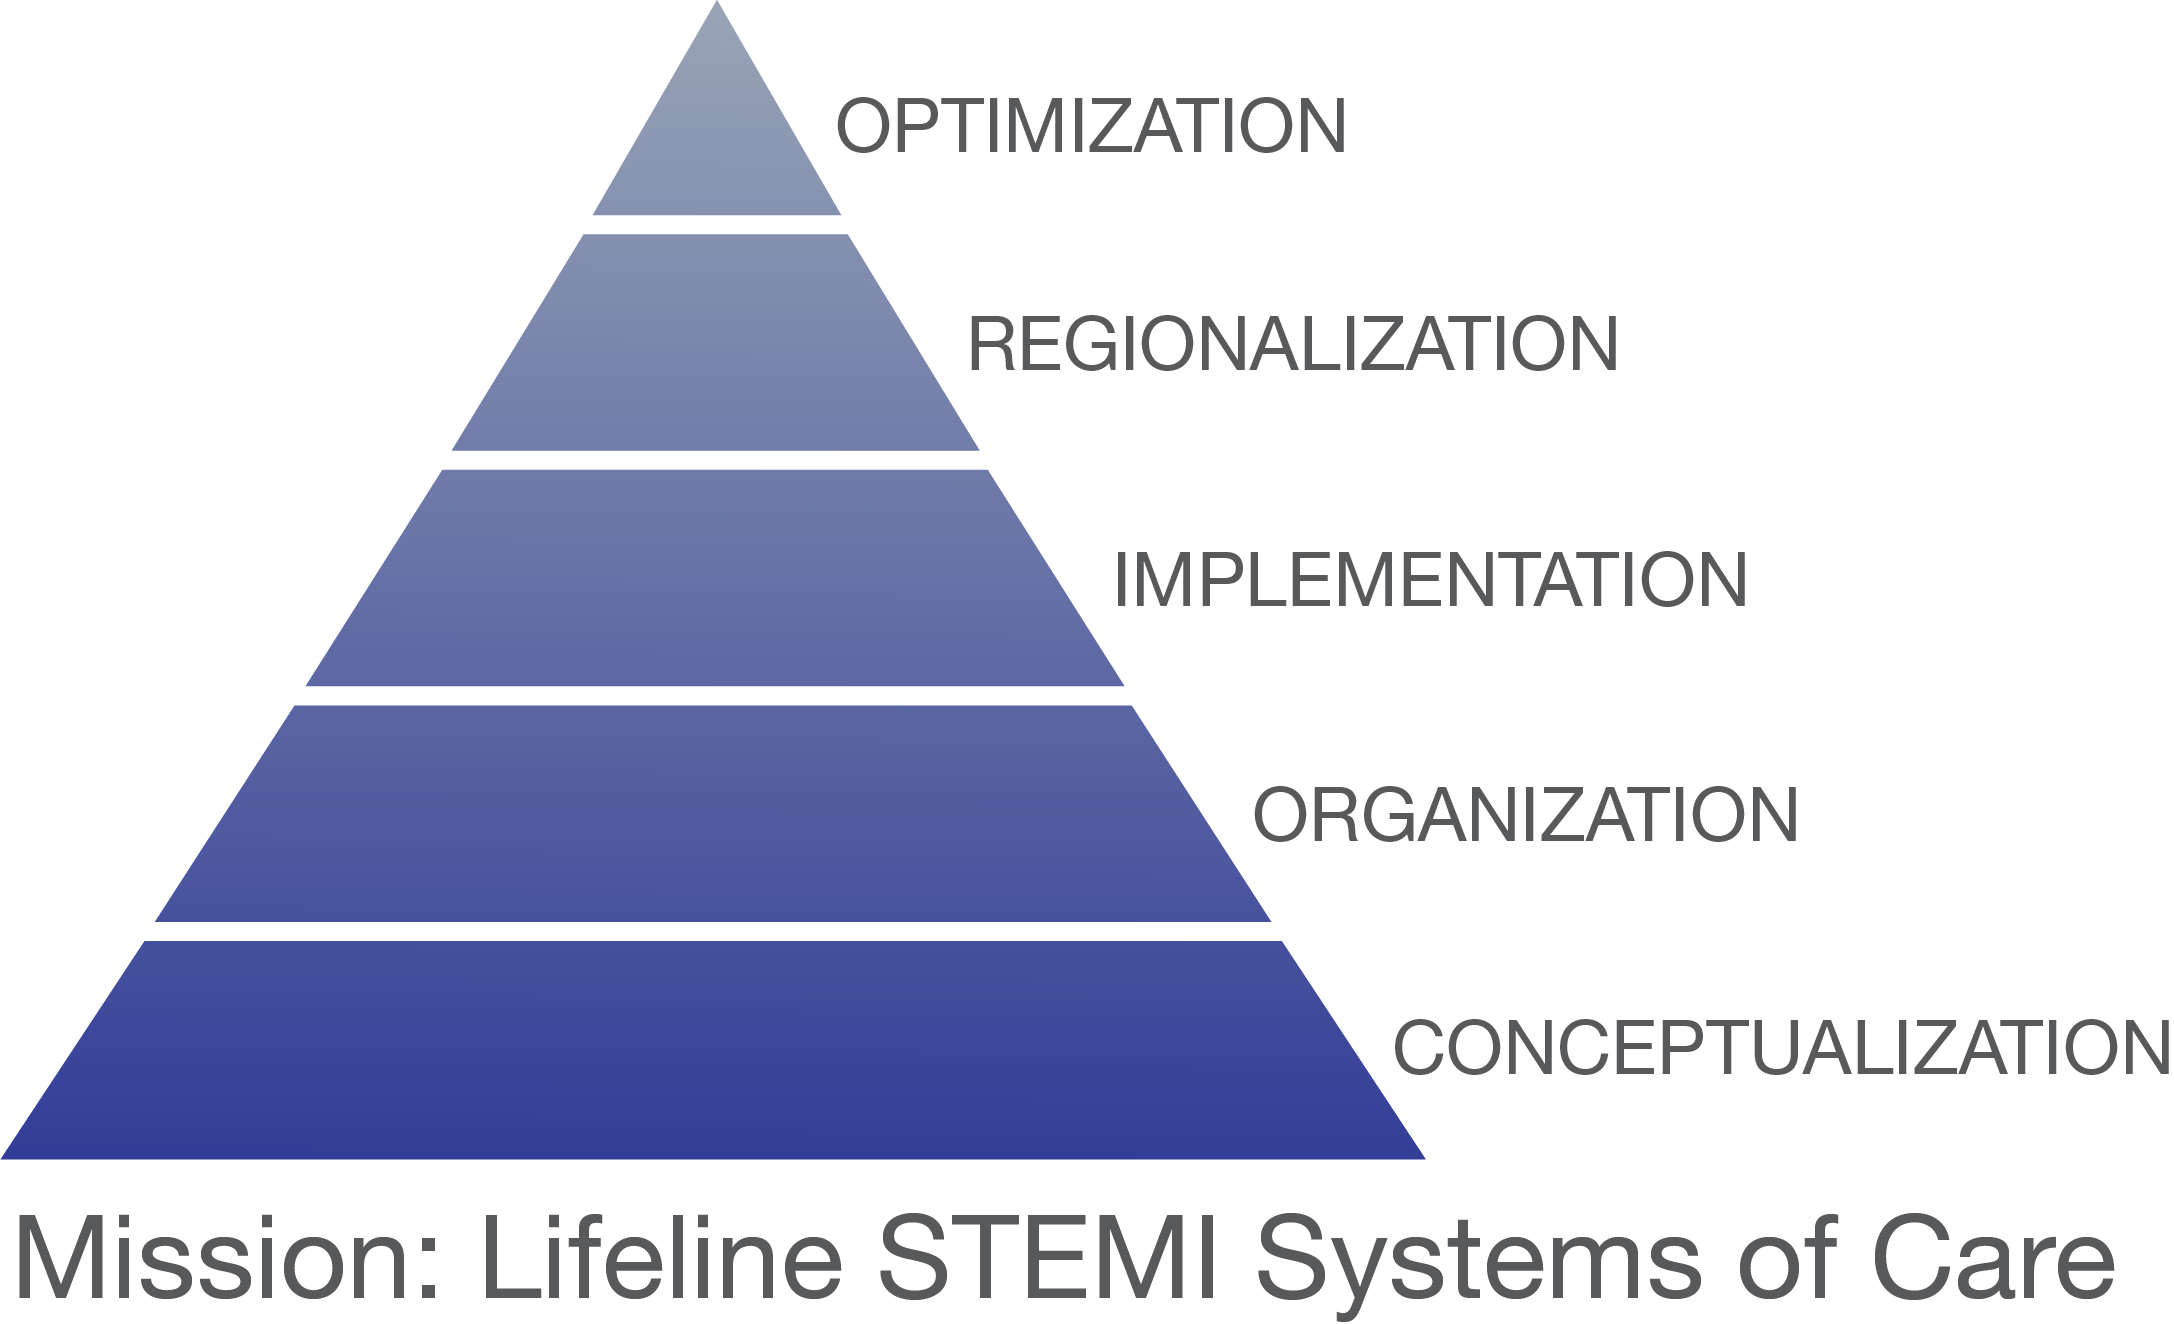 Mission Lifeline STEMI Systems of Care Pyramid